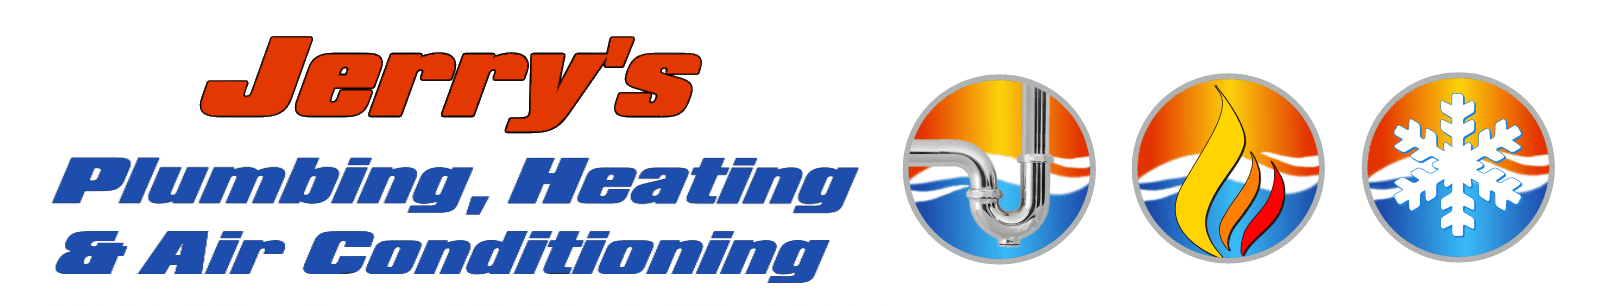 Jerry's Plumbing, Heating and Air